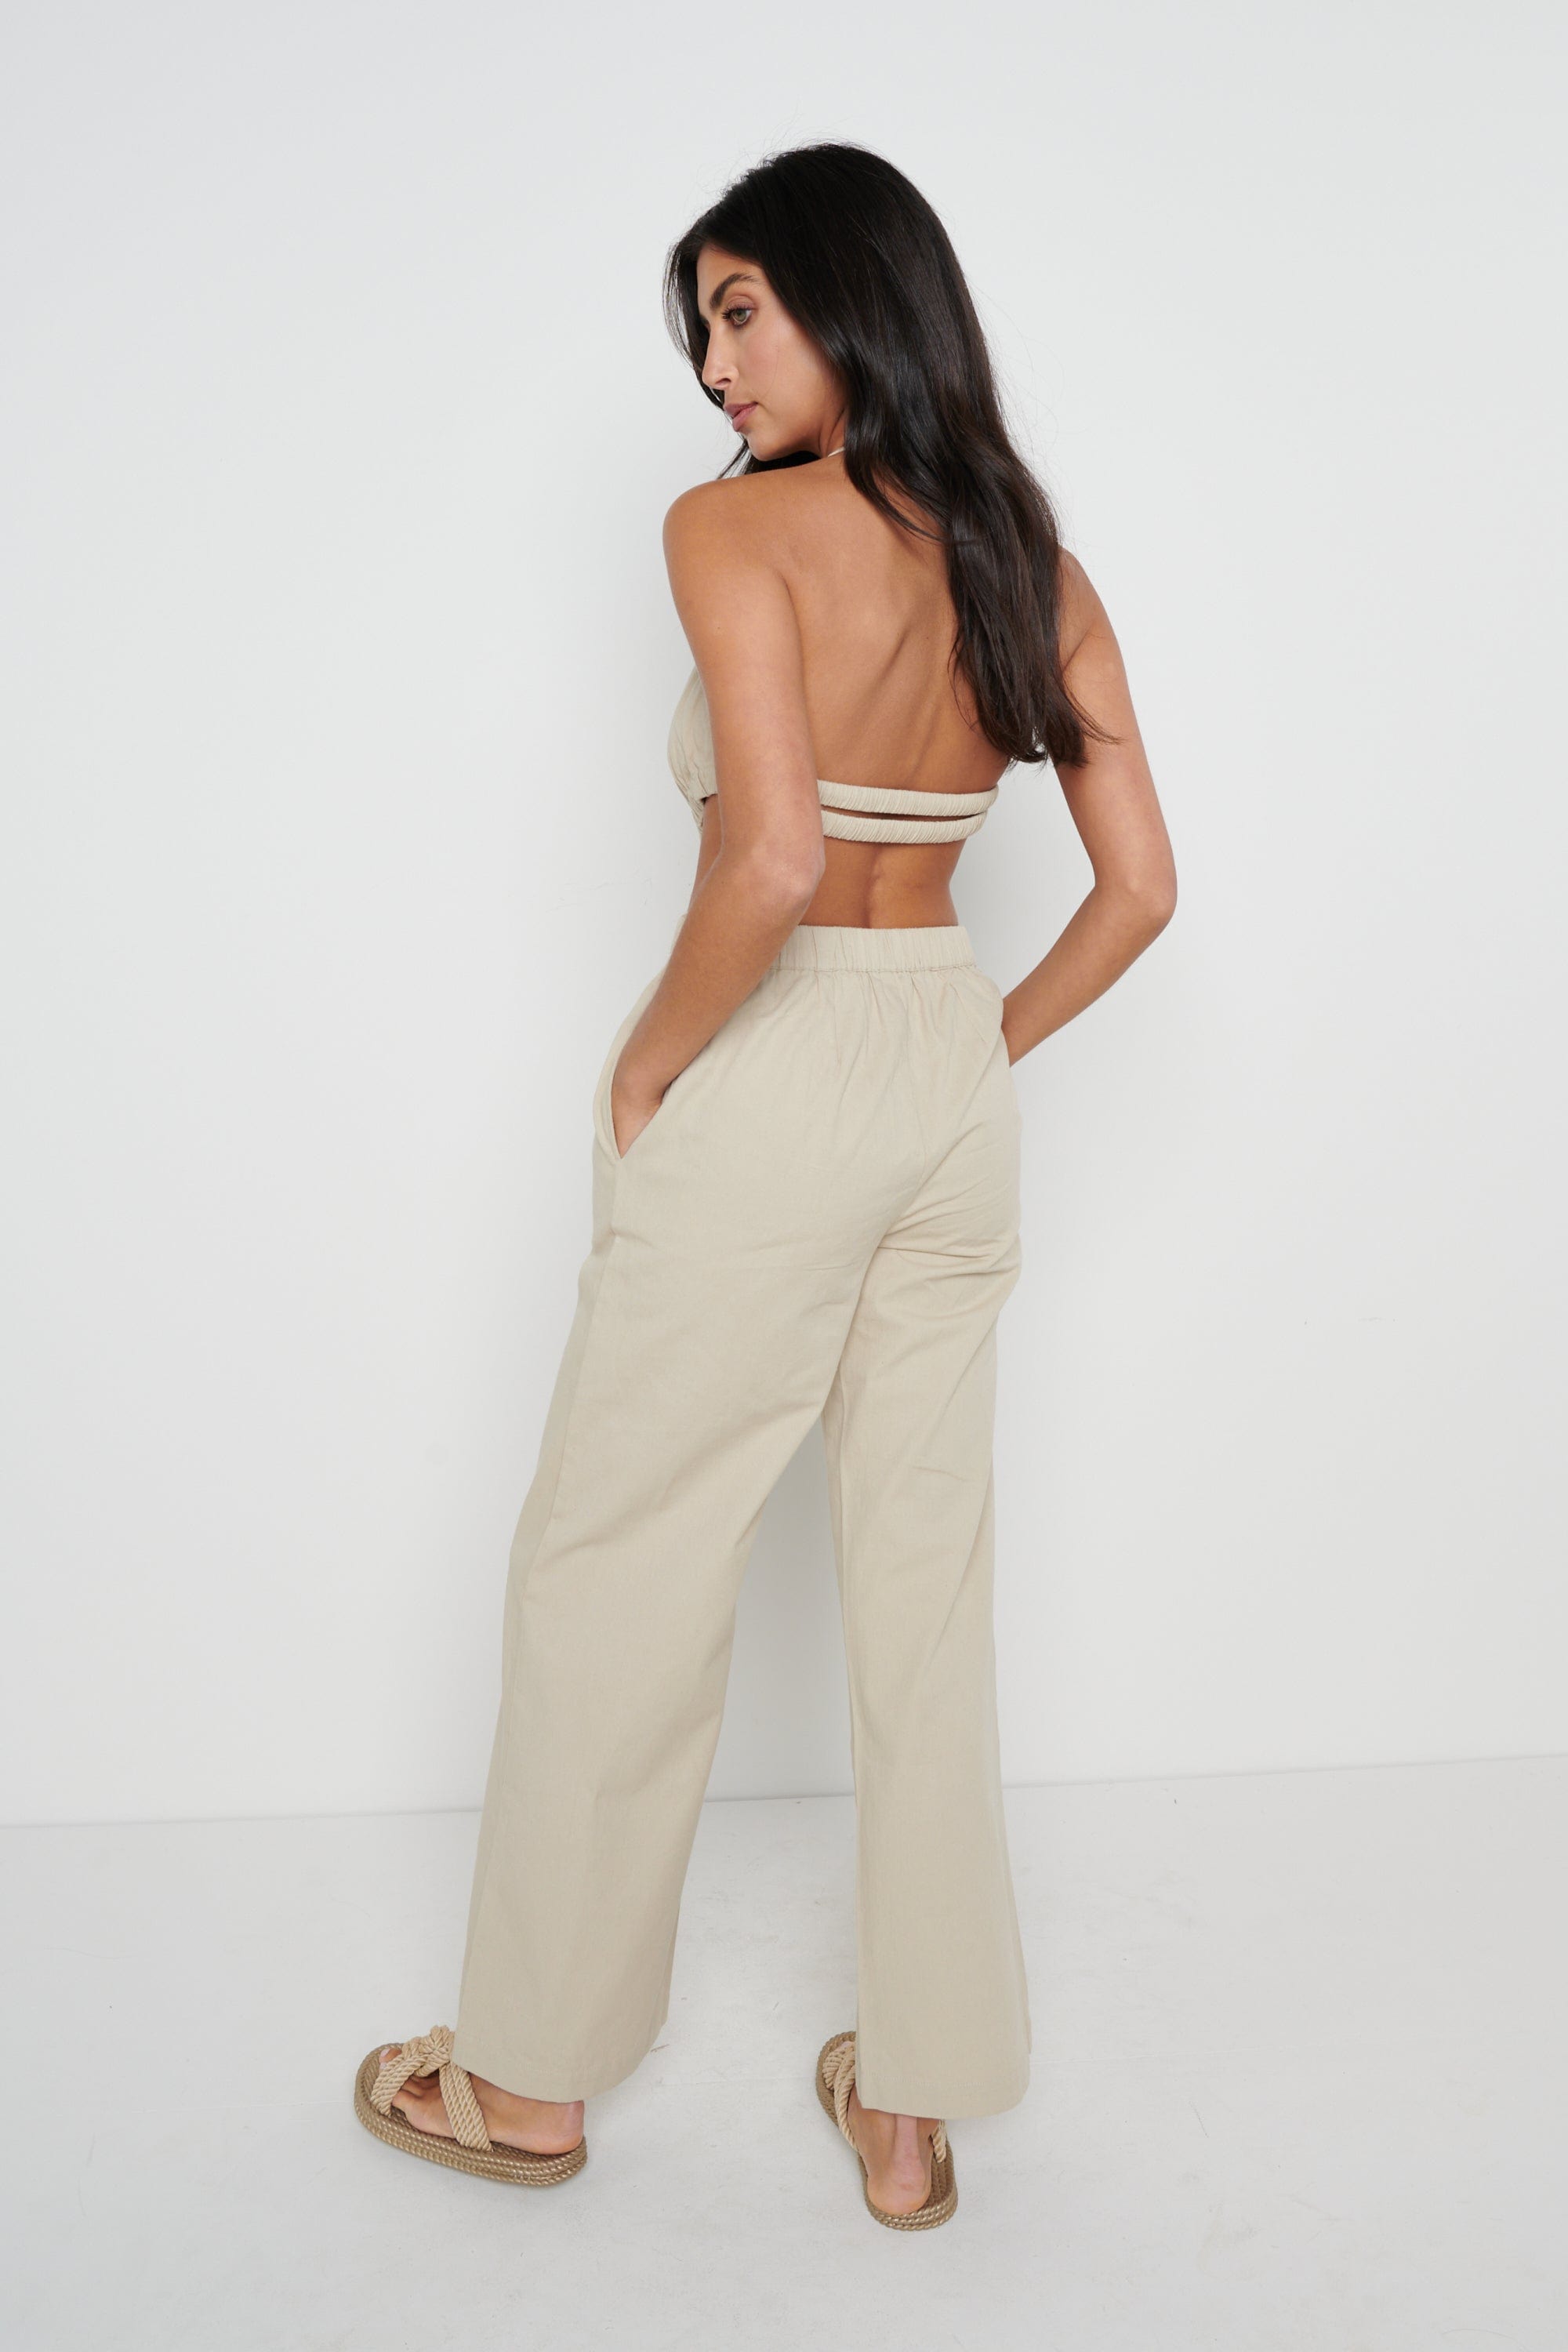 Lexi Scrunch Backless Jumpsuit - Taupe